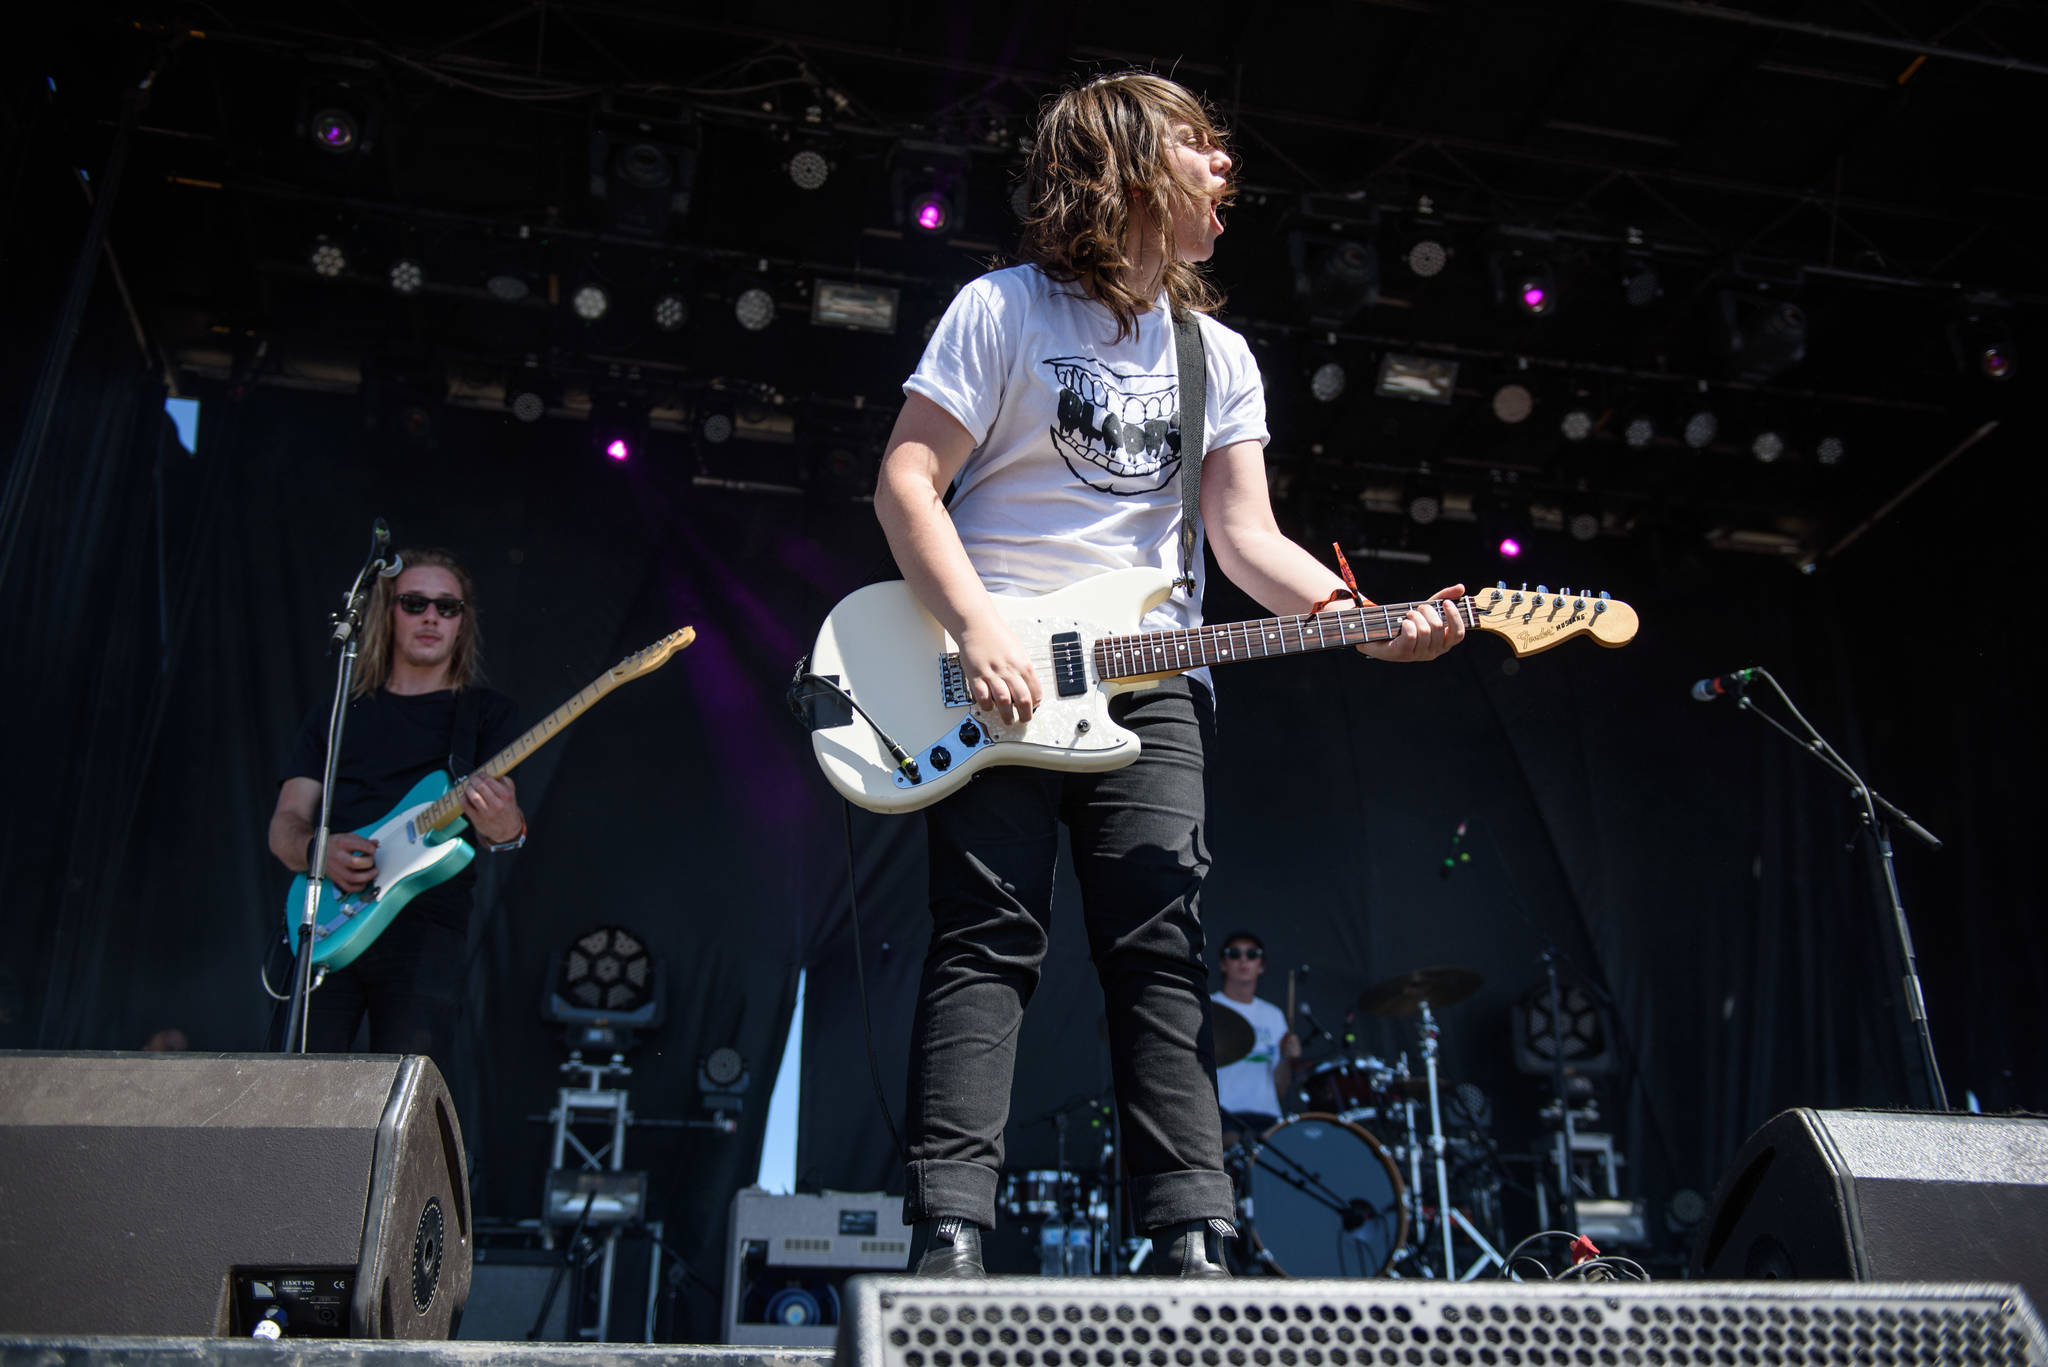 Aussie Alex Lahey tried not to get too sunburnt while rocking out.